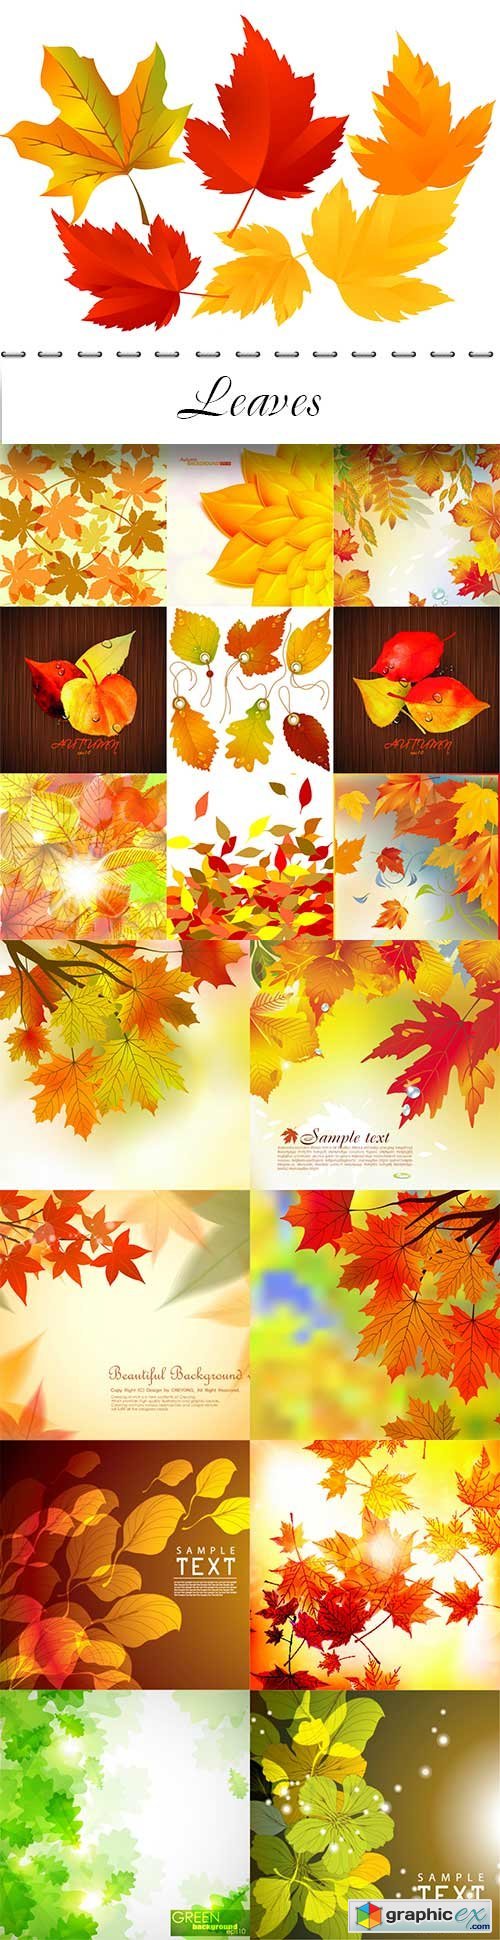 Autumn vector backgrounds collection - Leaves